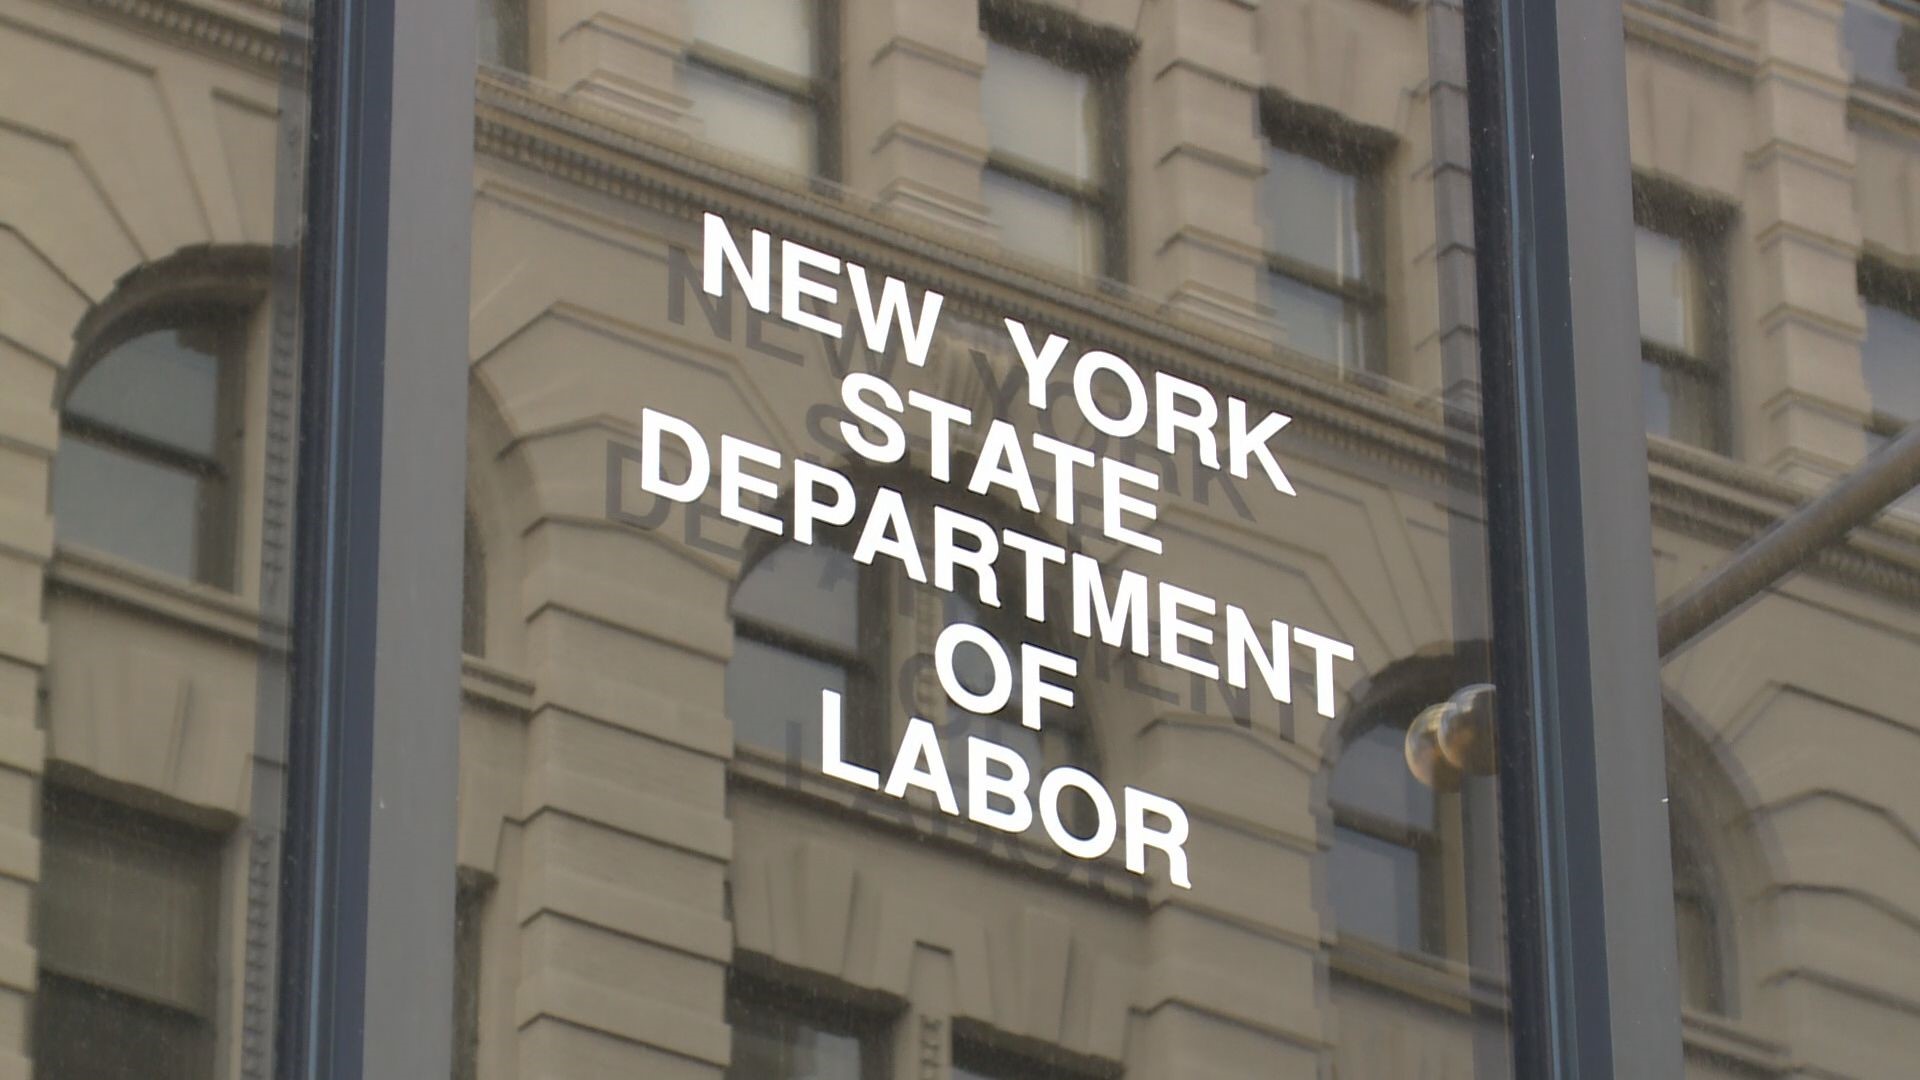 Nys Department Of Labor Beware Of Text Scam